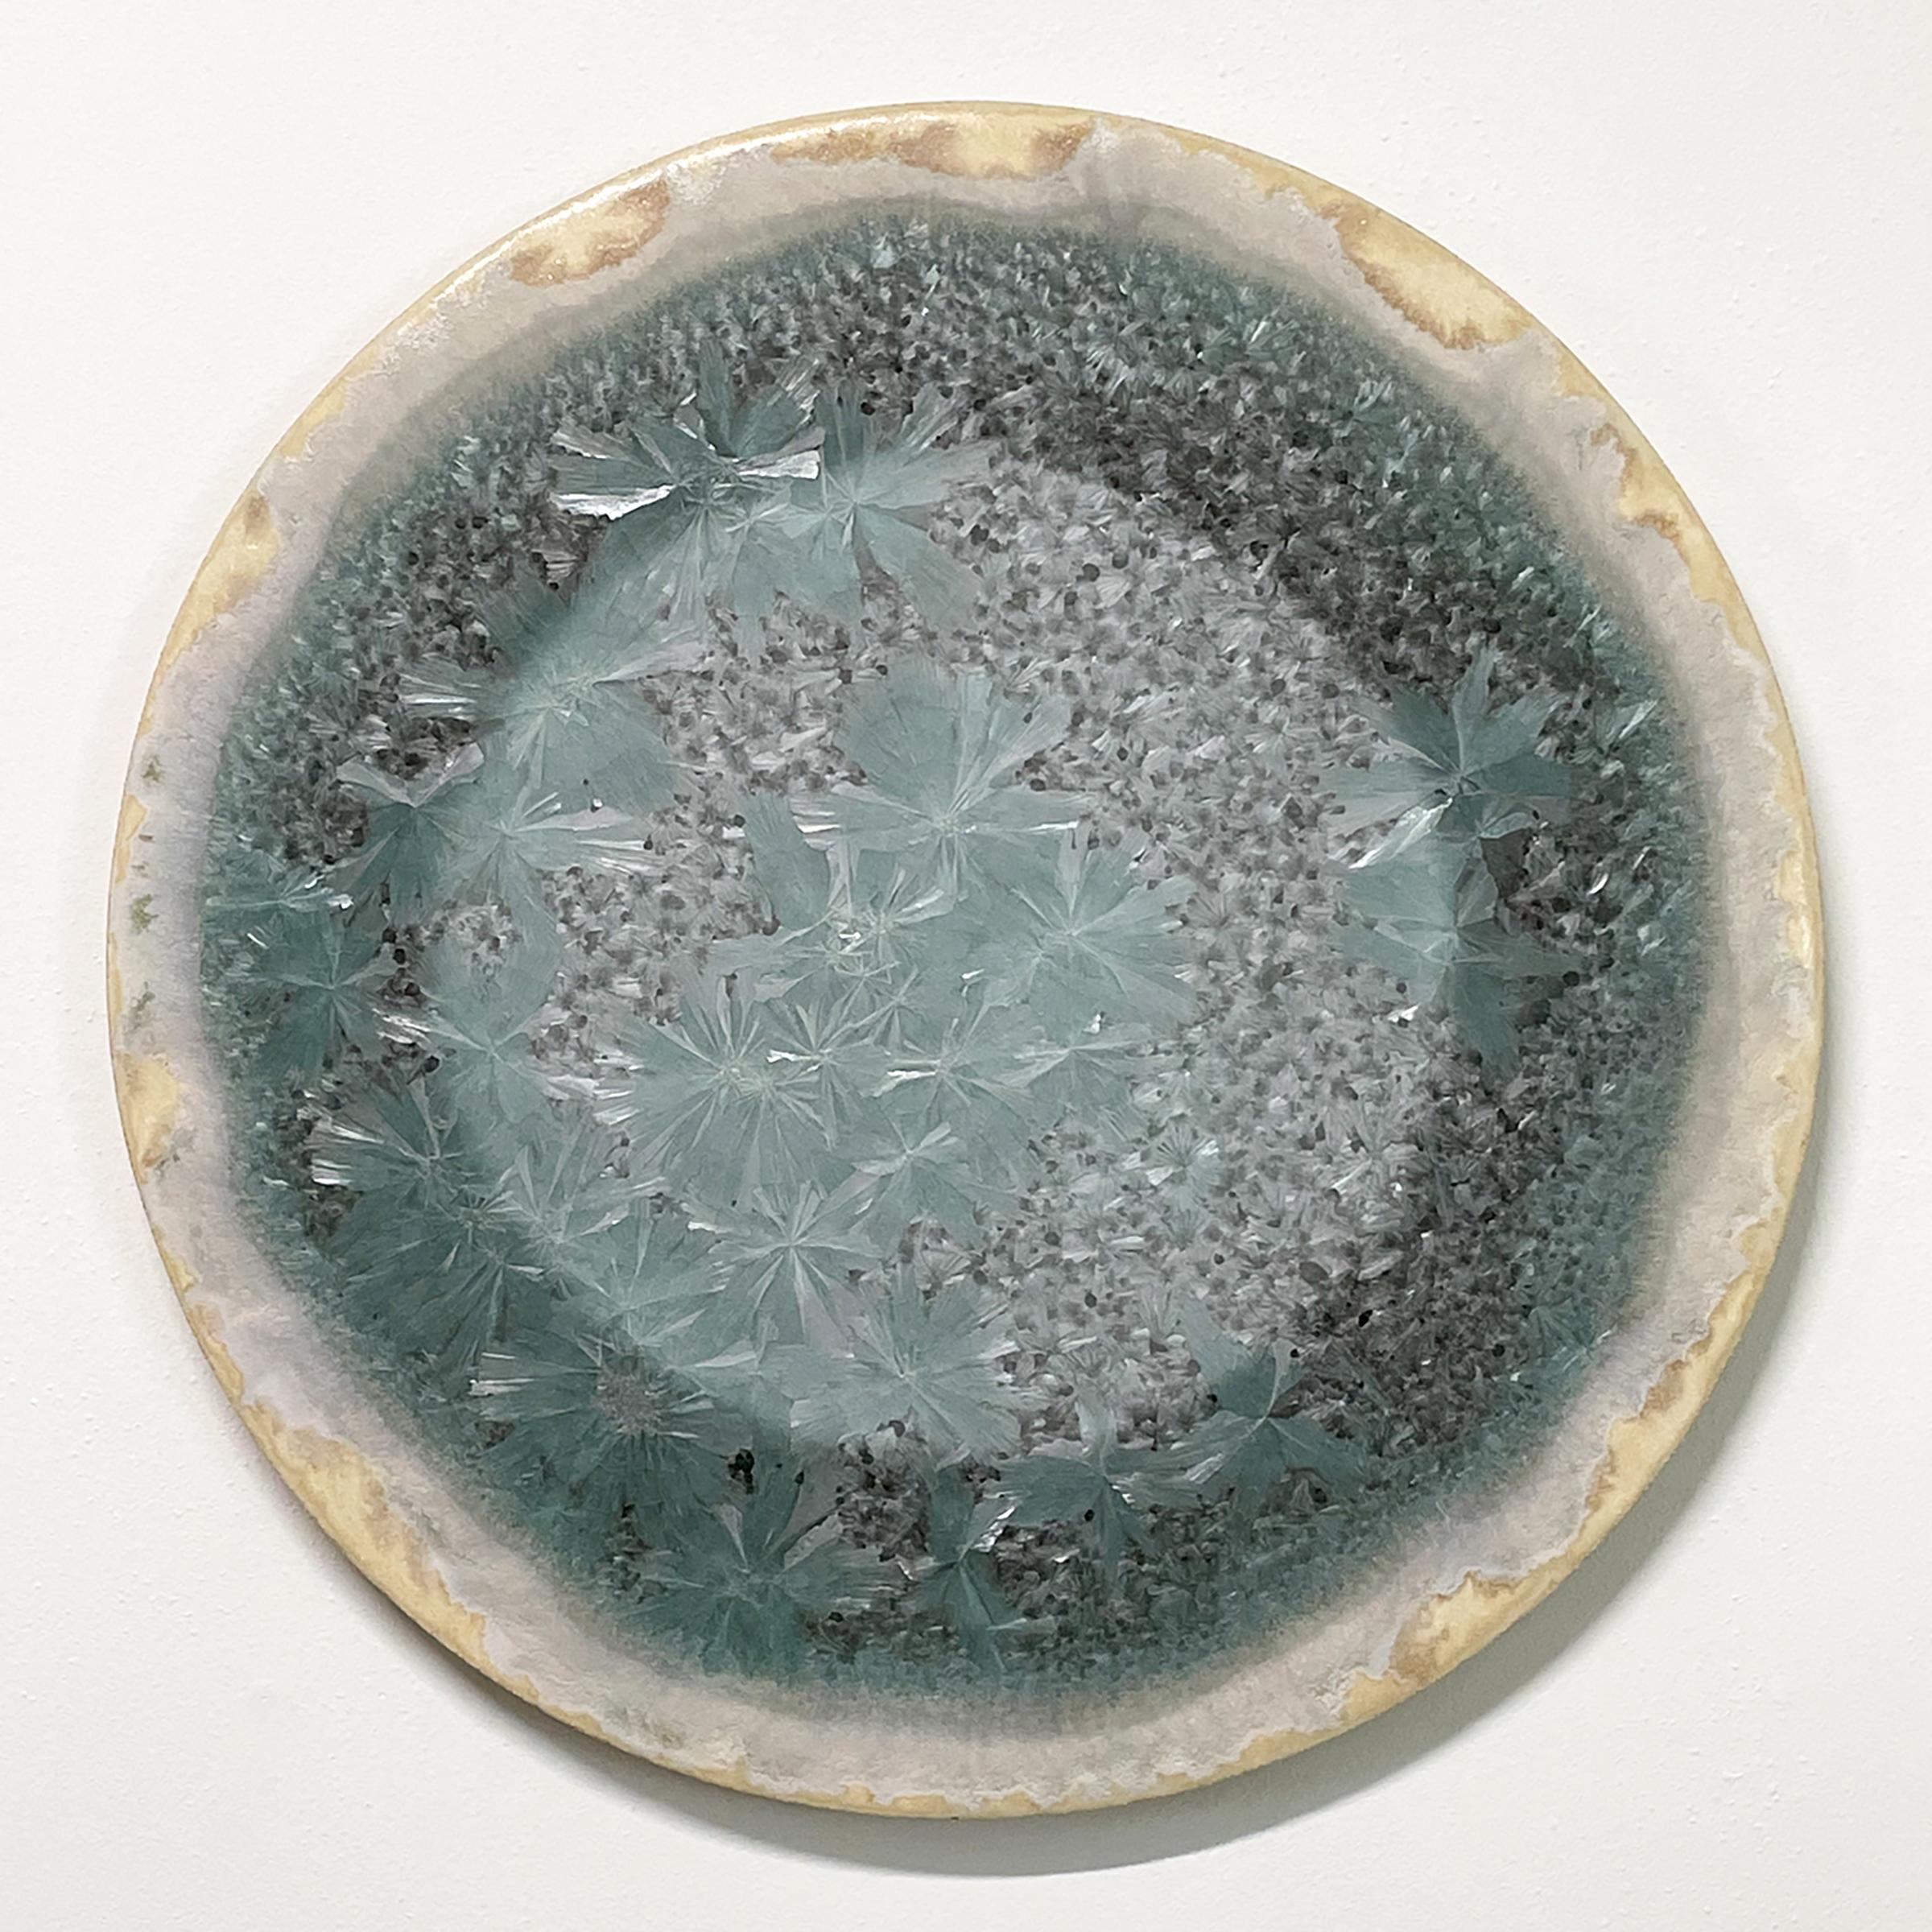 Crystal Blooms in the Moonlight
Ceramic crystal glaze painting by William Edwards
Hand rolled earthenware circular slab with crystal glaze. 

William received his BFA in sculpture from the historic San Francisco Art Institute and his MFA from UC